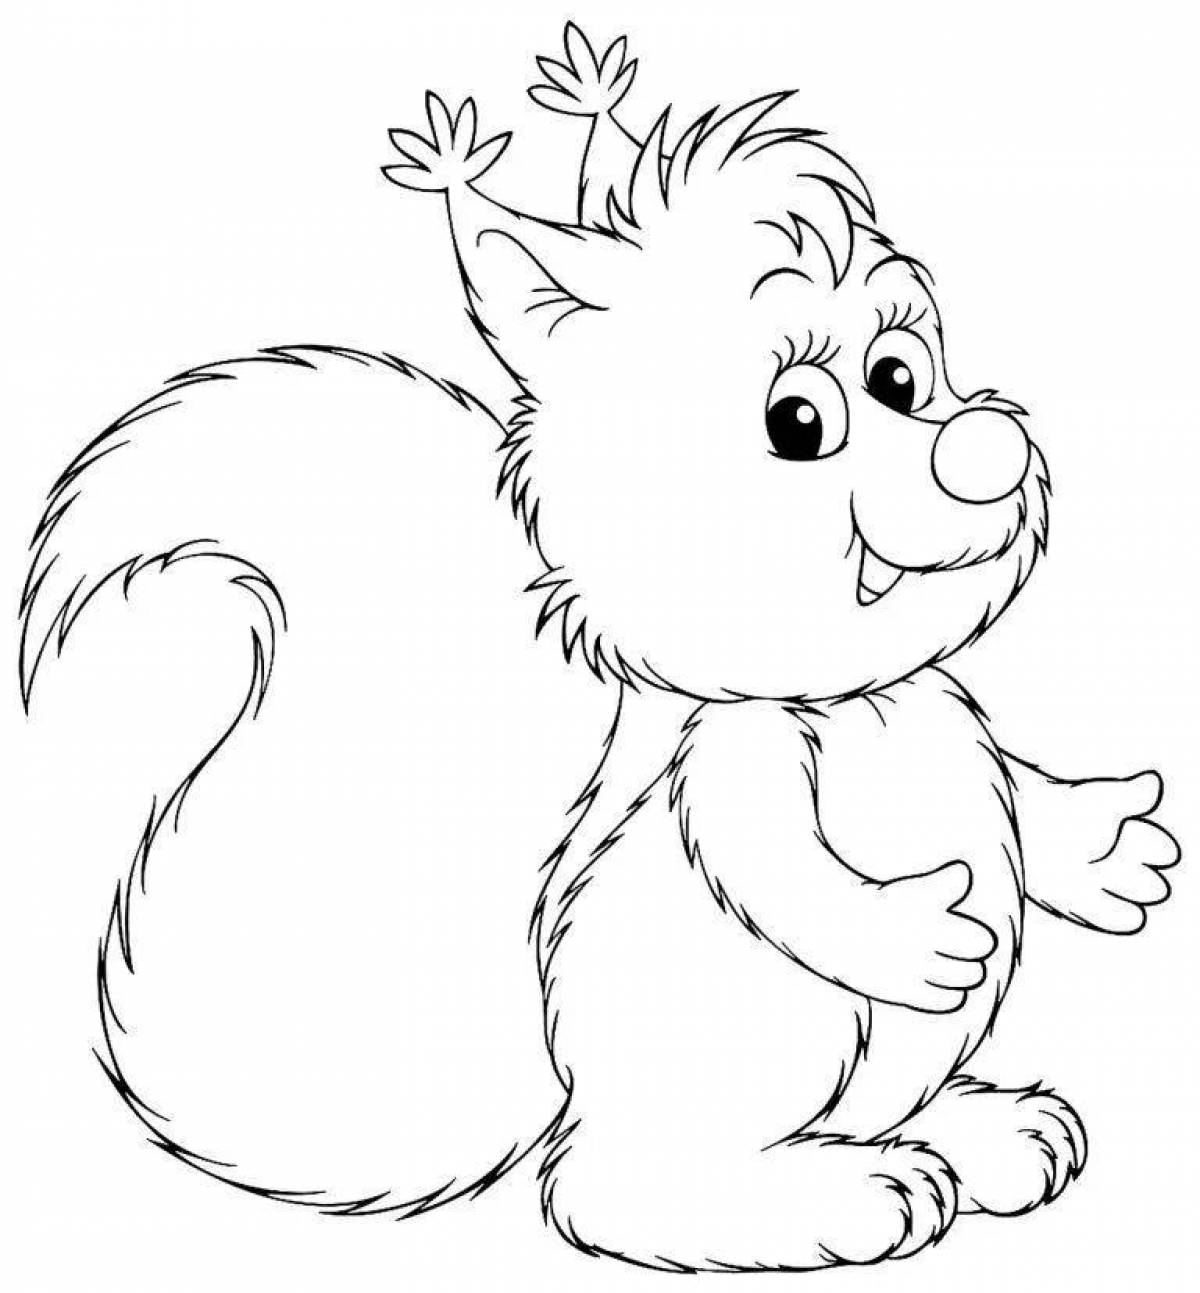 Humorous coloring book squirrel for children 3-4 years old